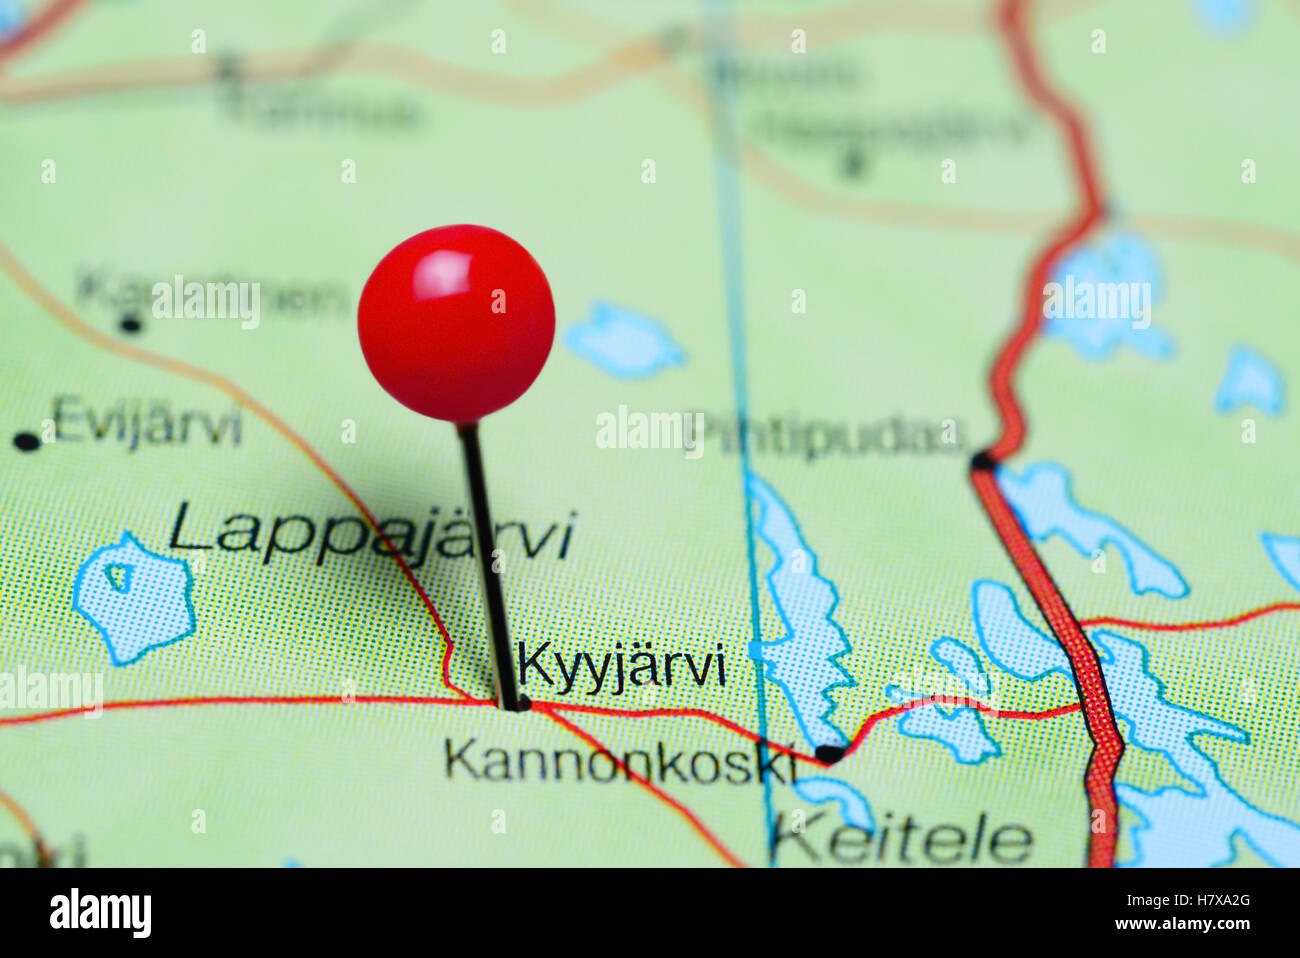 Kyyjarvi pinned on a map of Finland Stock Photo